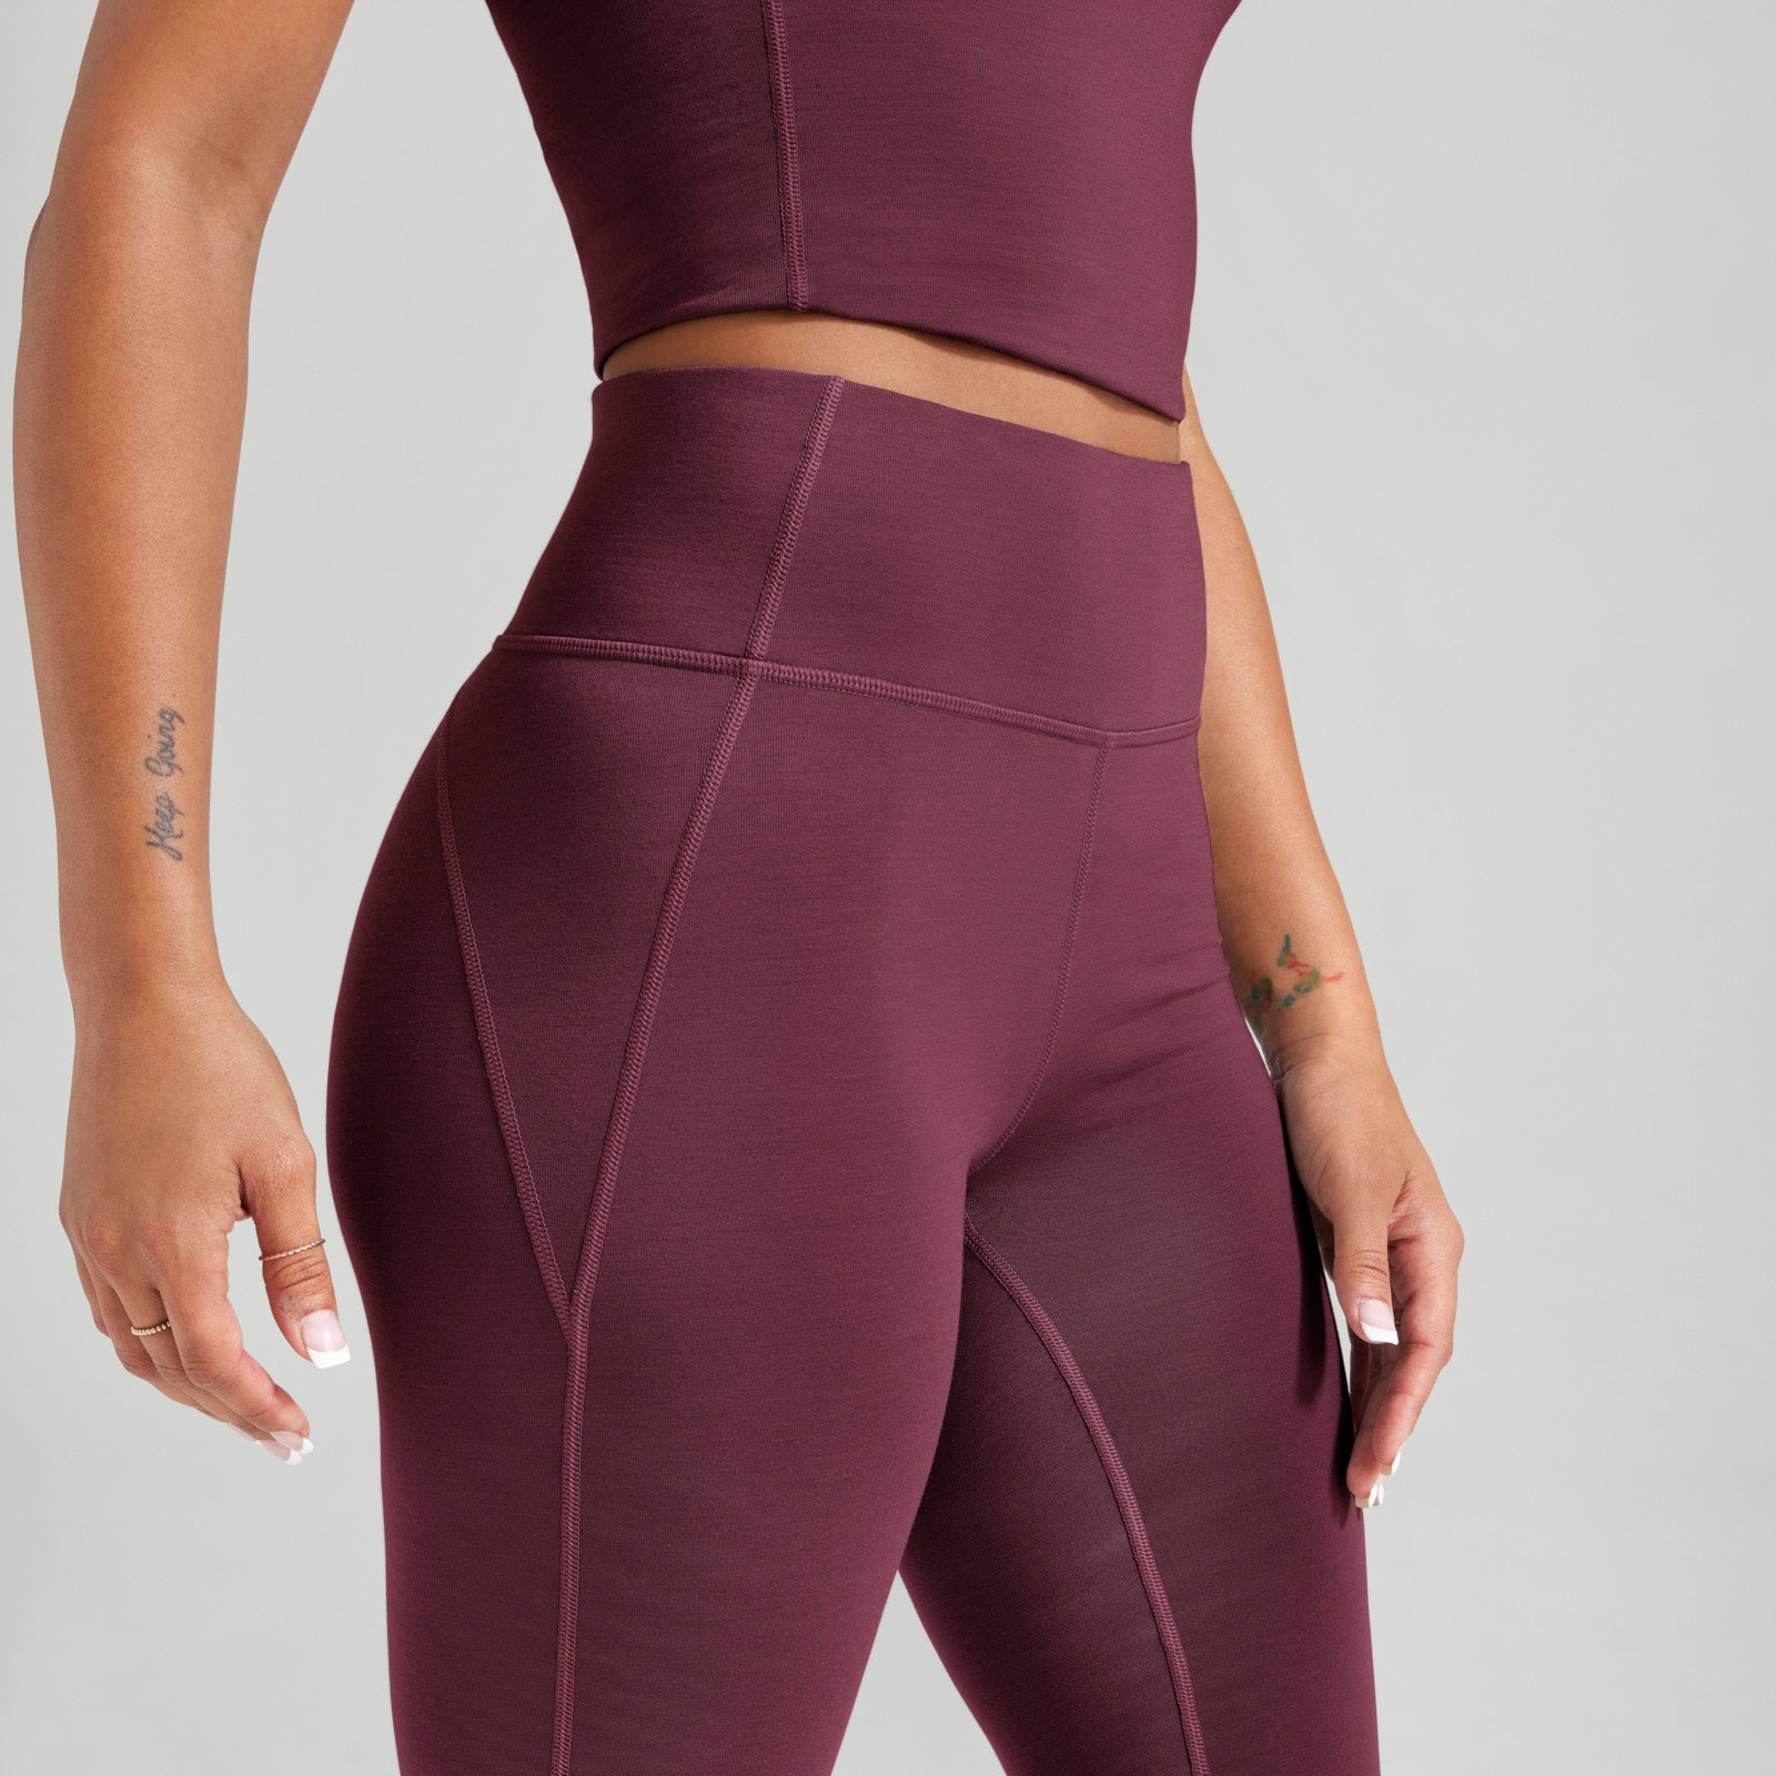 Squat, stride and stretch in the lululemon Invigorate Tight.